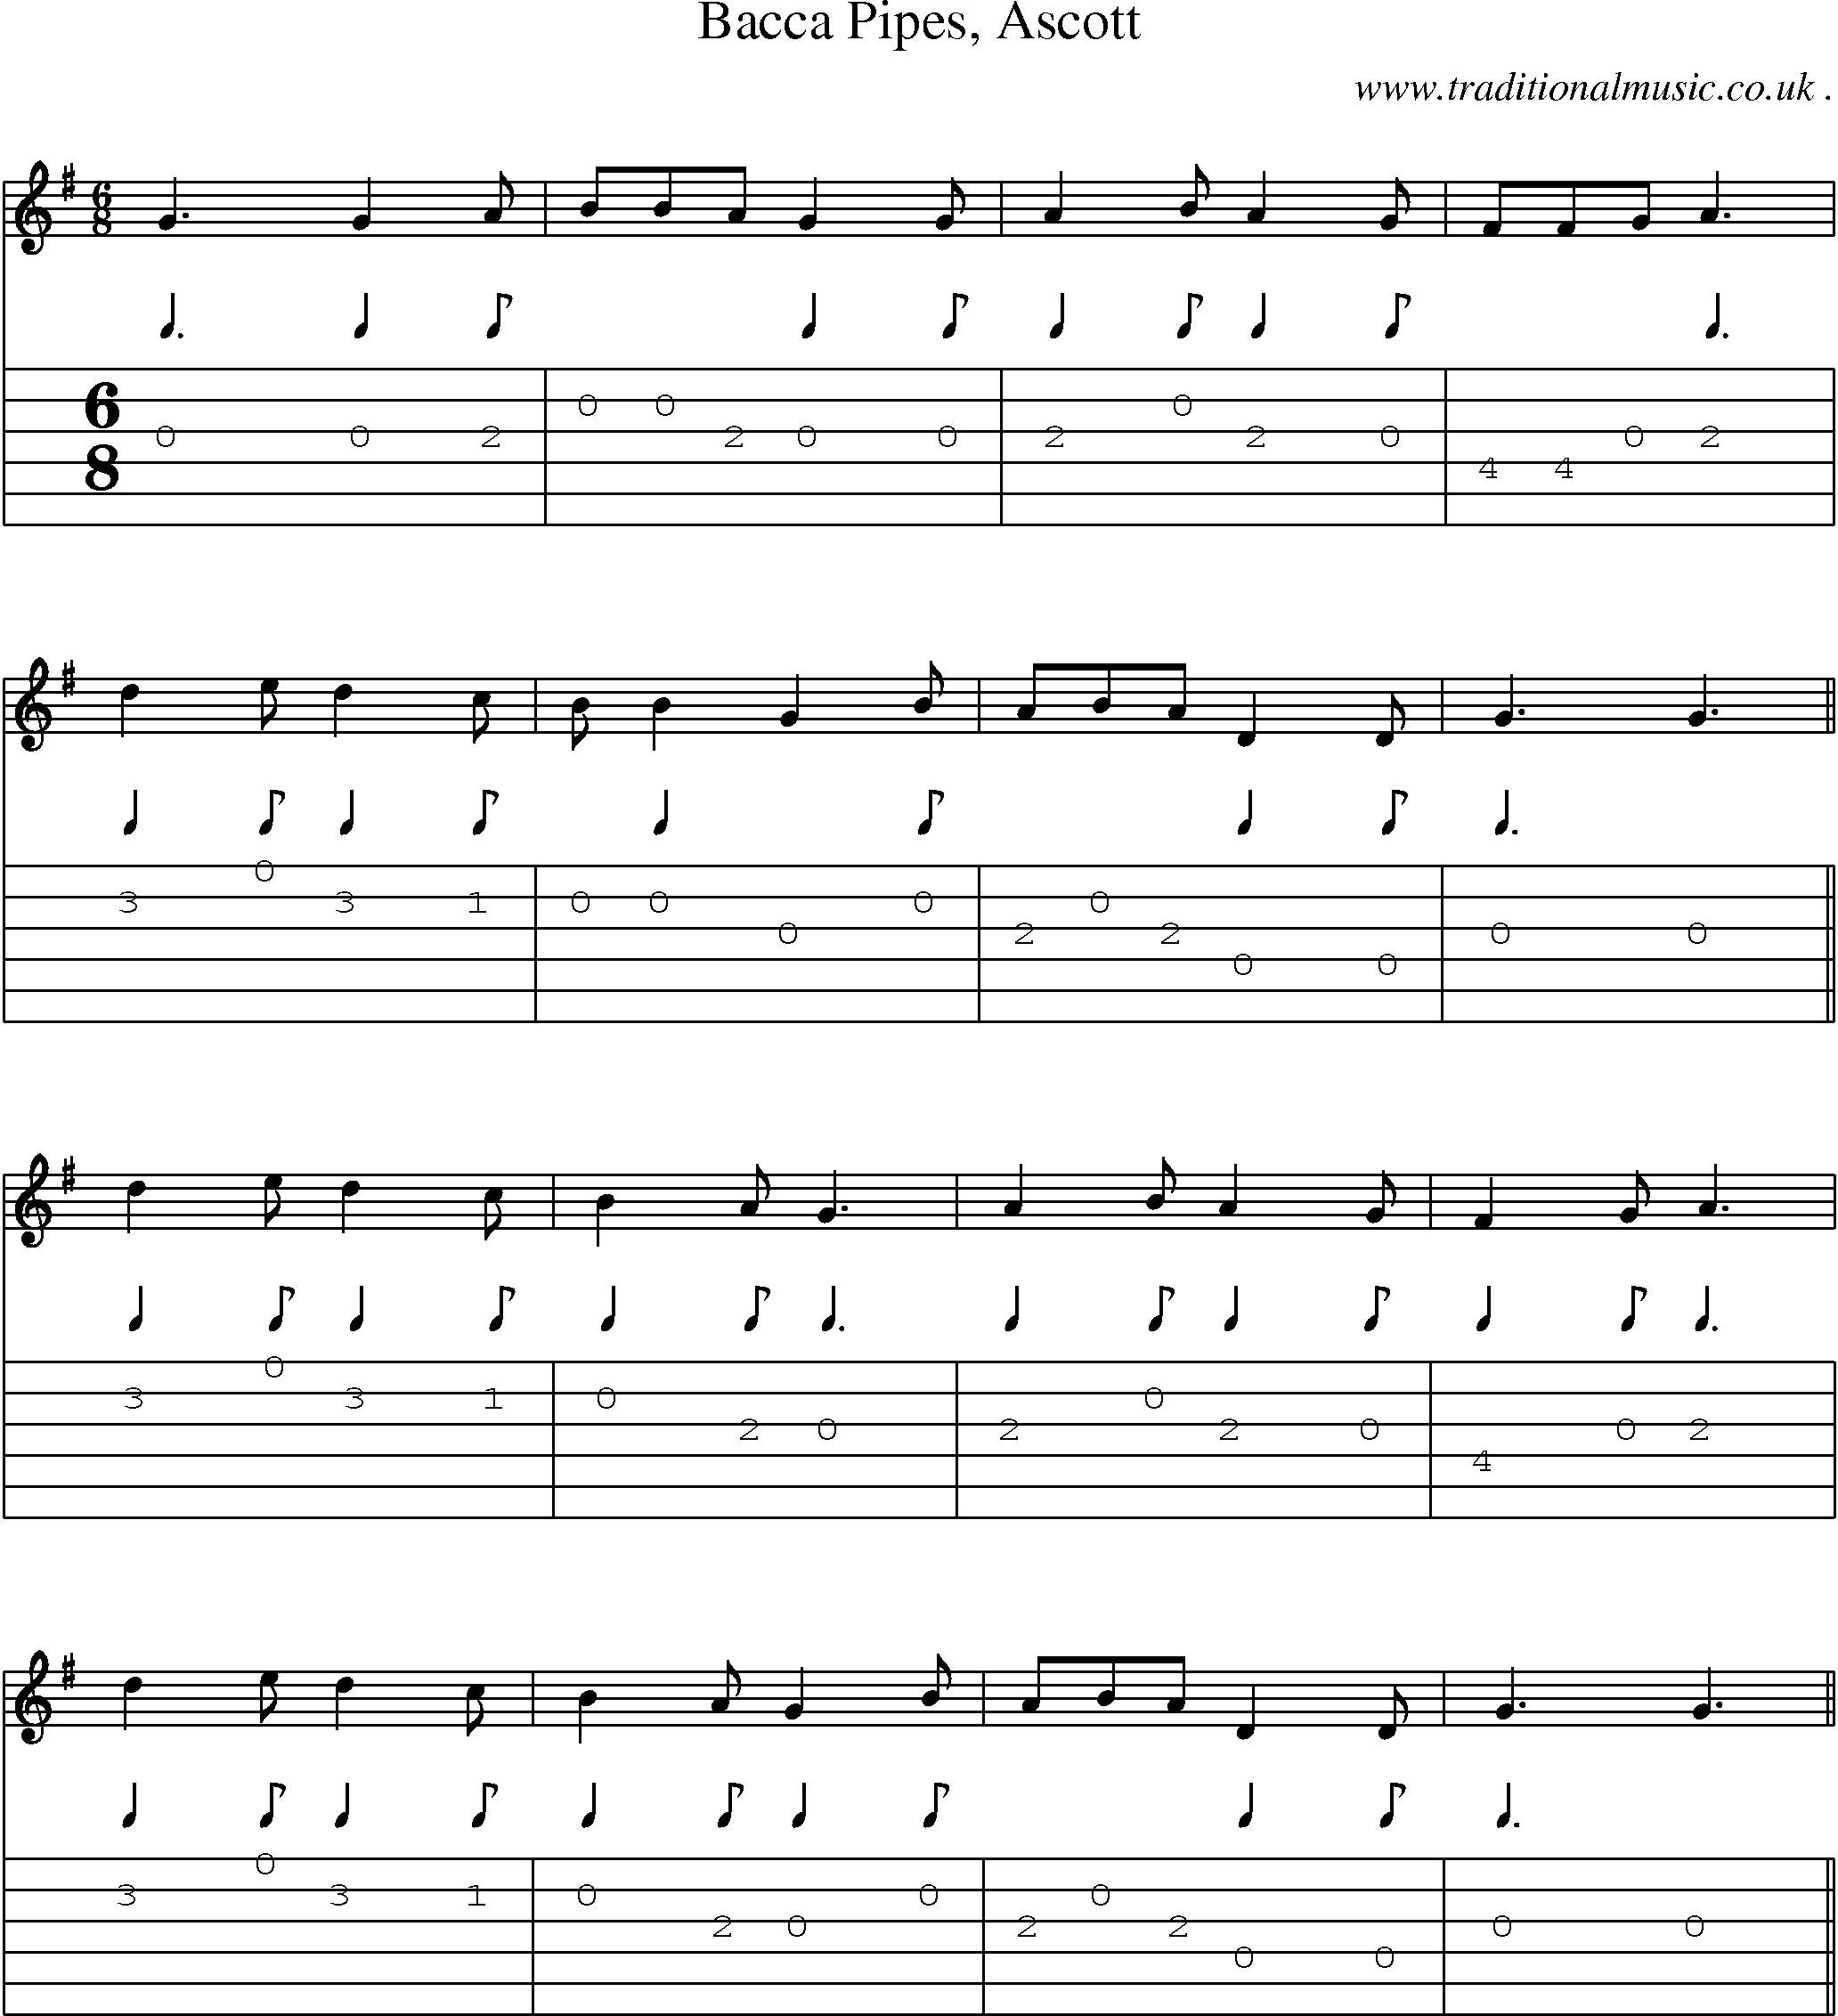 Sheet-Music and Guitar Tabs for Bacca Pipes Ascott